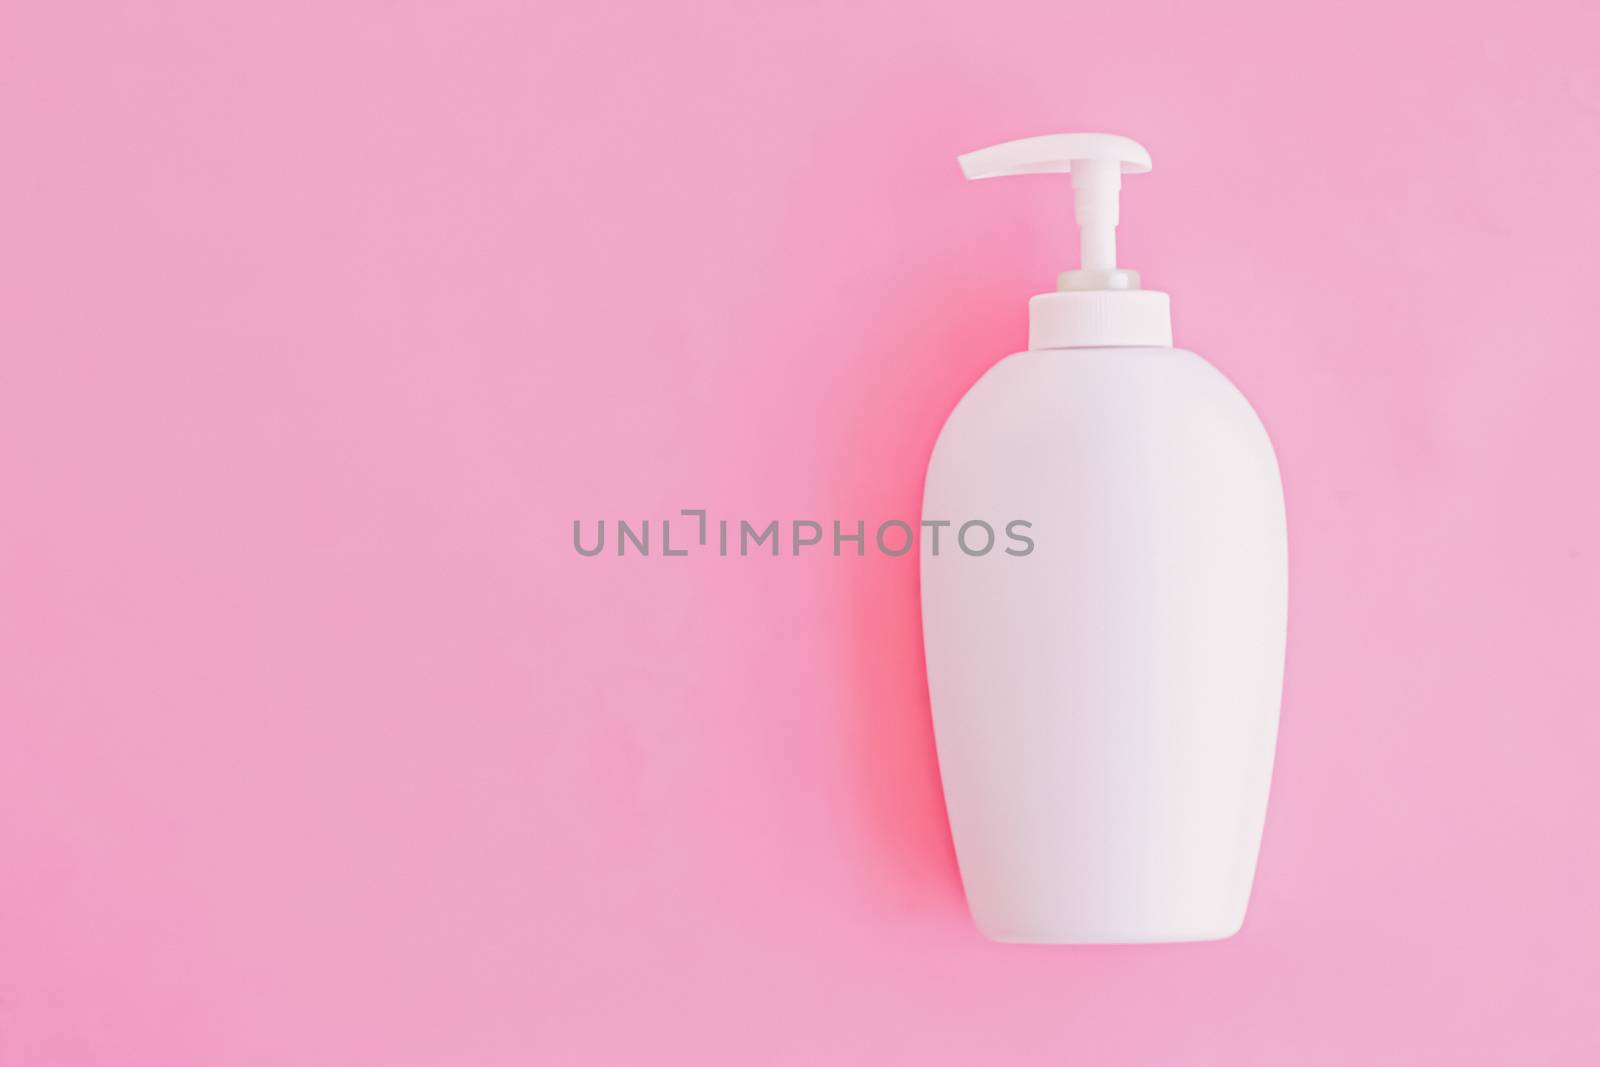 Bottle of antibacterial liquid soap and hand sanitizer on pink background, hygiene product and healthcare, flatlay